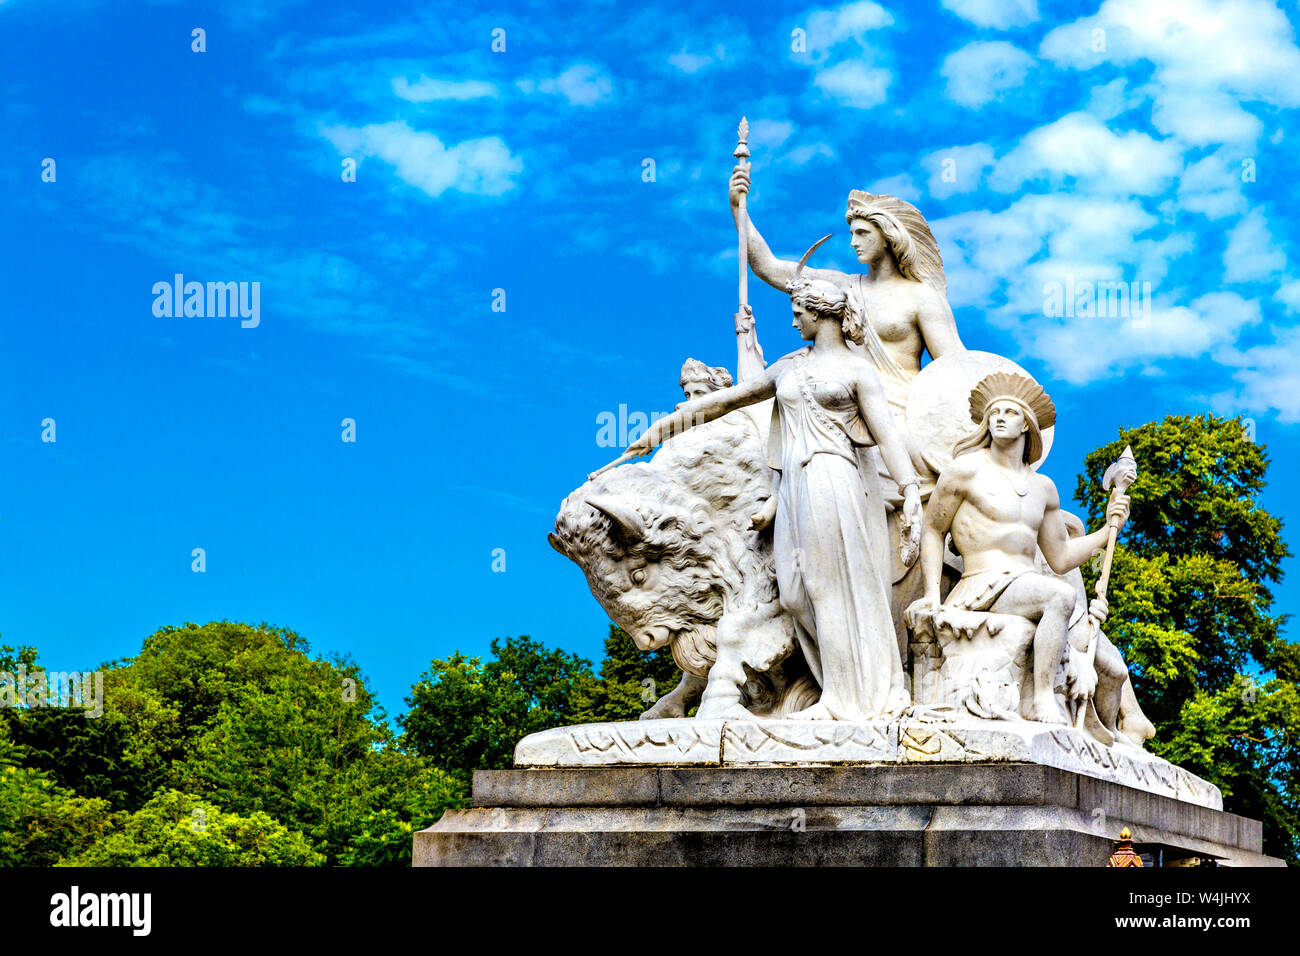 One of the allegorical sculptures representing America by John Bell on the outer corner of the Albert Memorial, London, UK Stock Photo